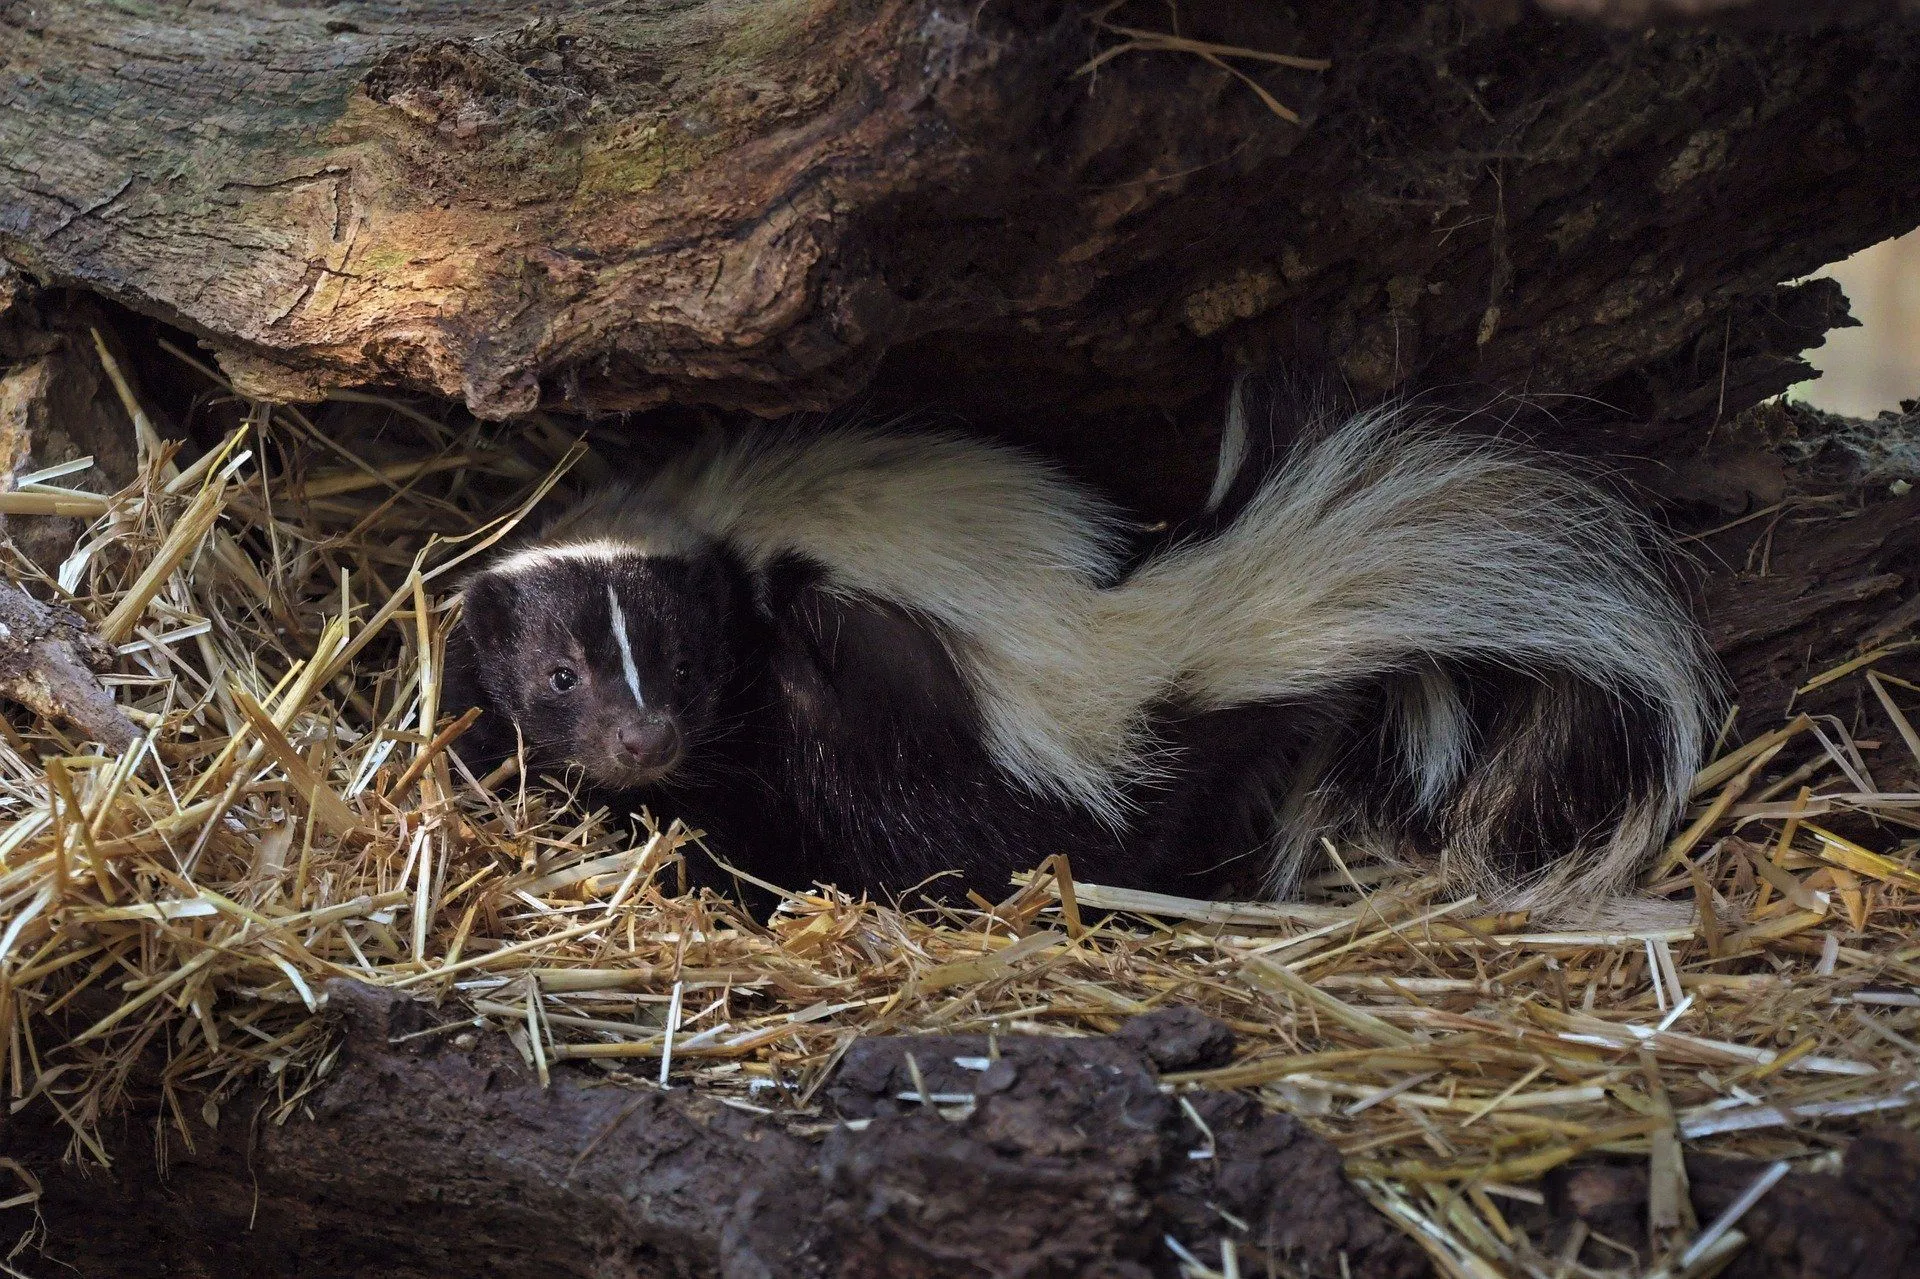 Skunks are nocturnal, they have excellent night vision.